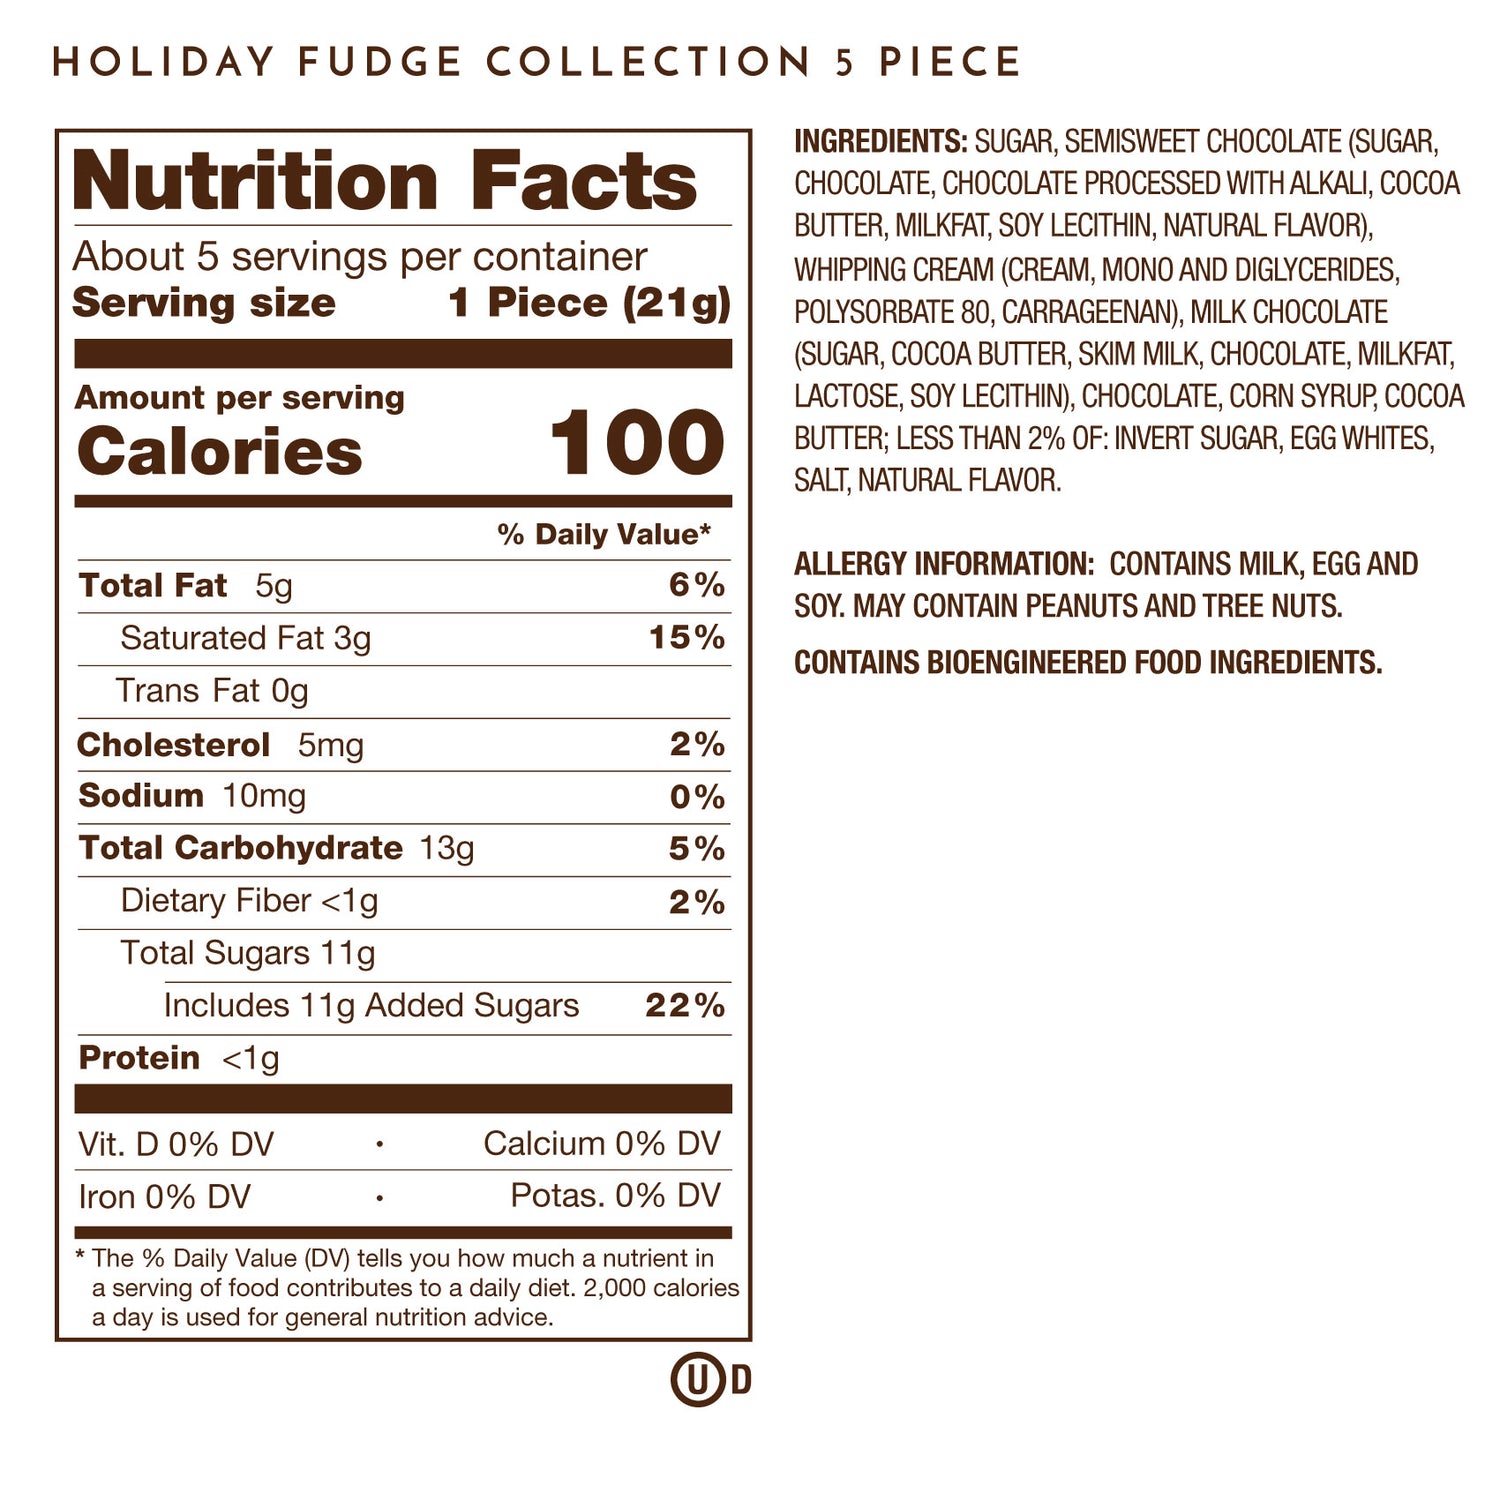 Holiday Chocolate Fudge, 5 Piece Premium Chocolate Collection Nutrition Facts